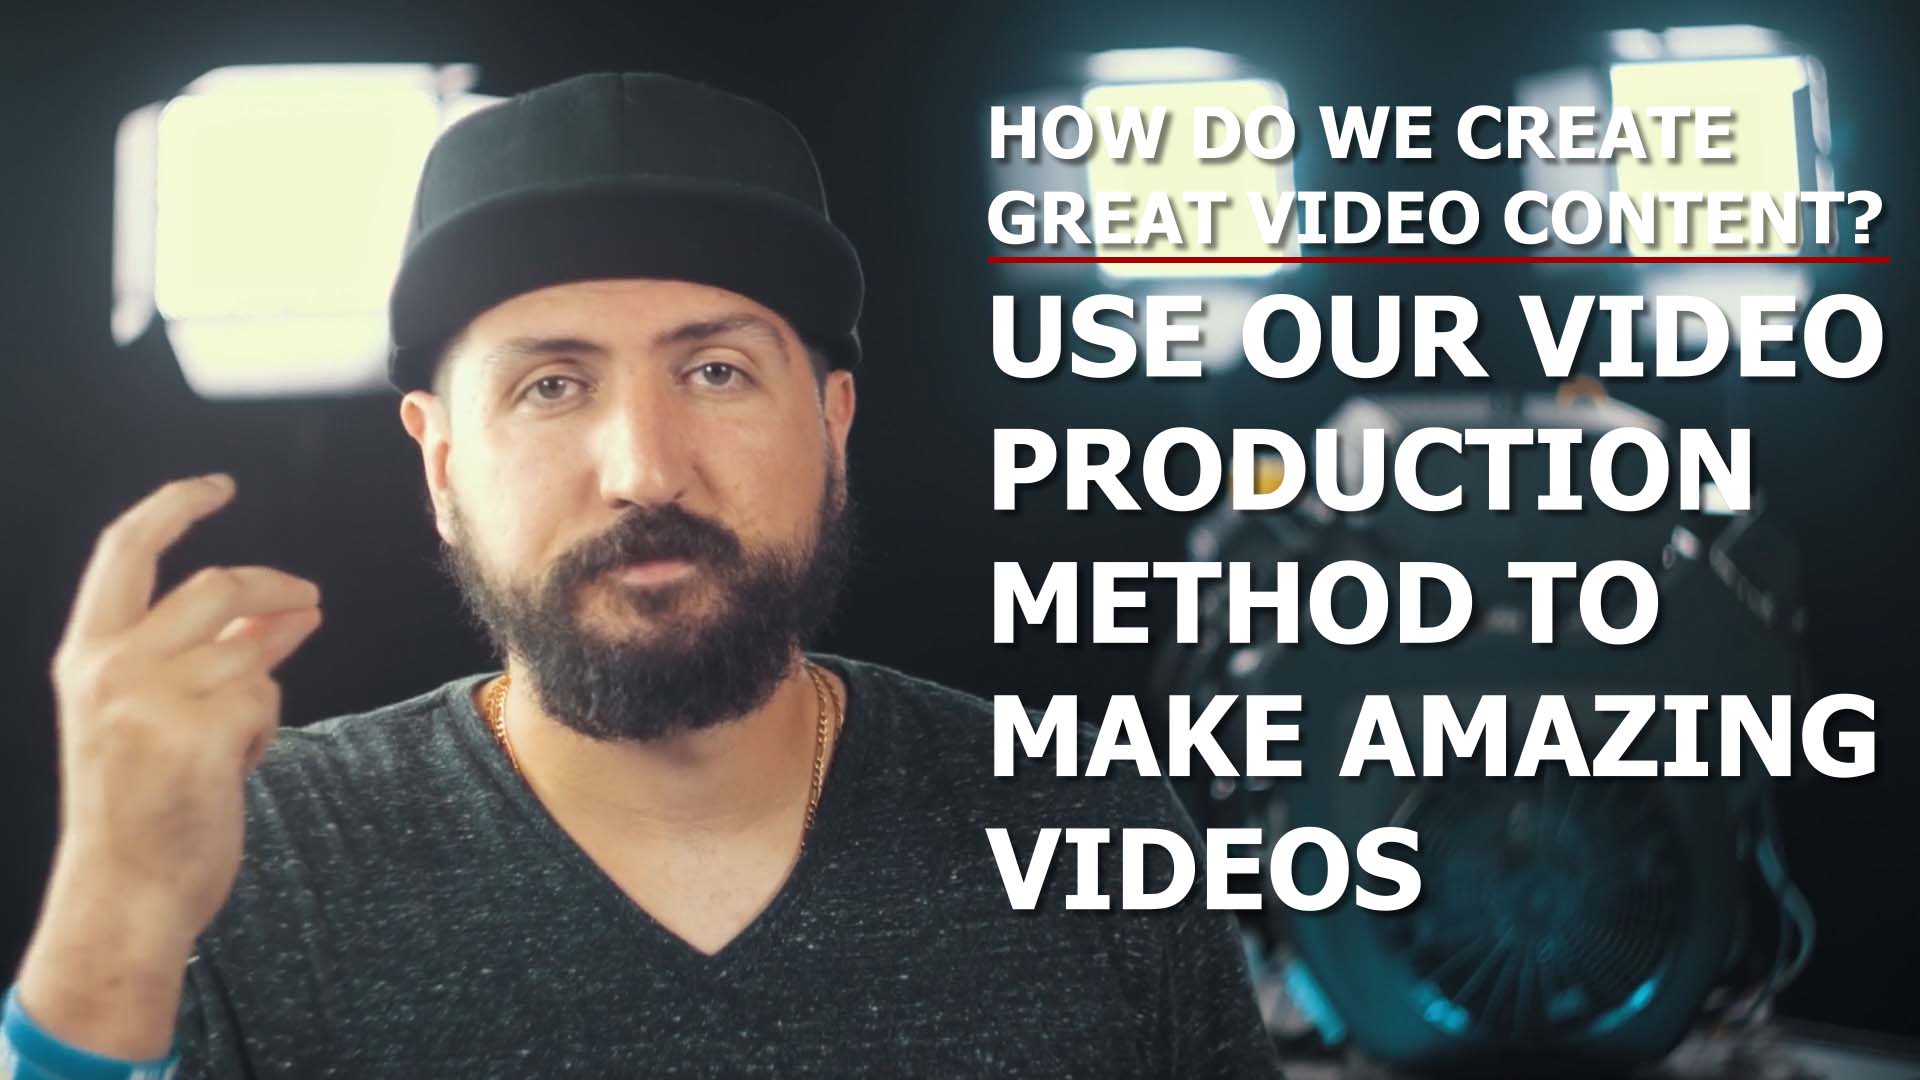 Make Amazing Videos with our Video Production Workflow